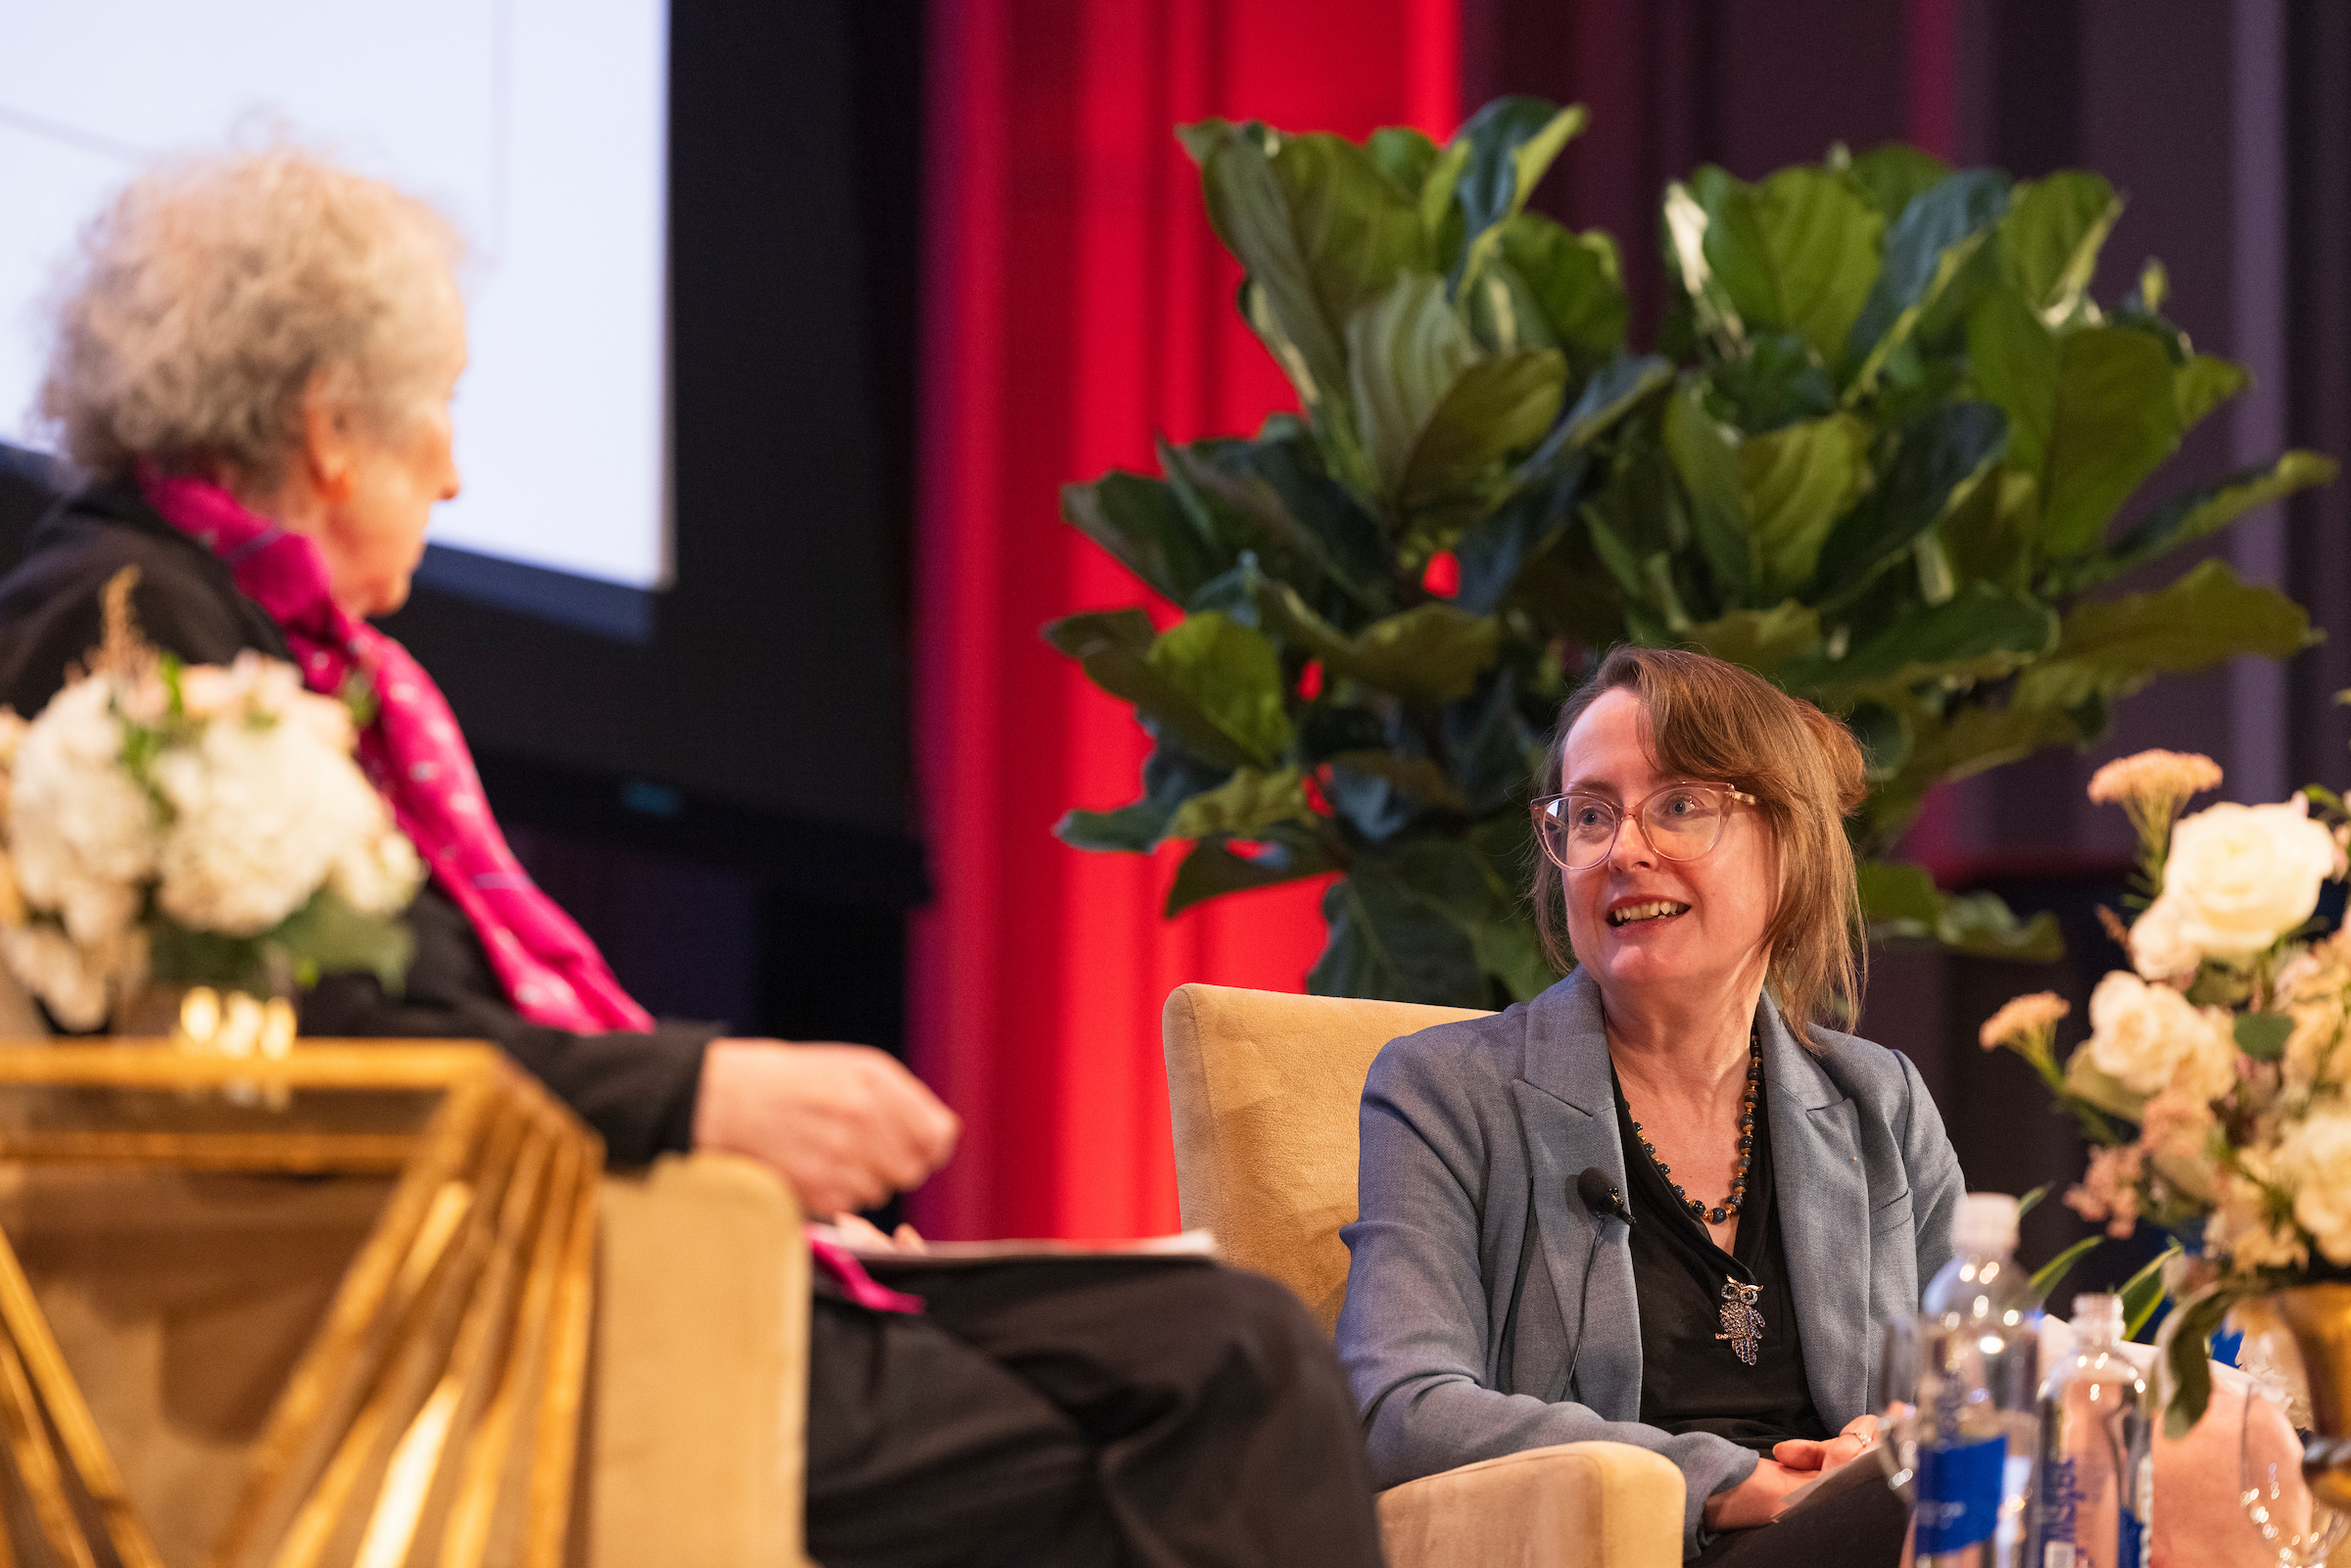 Emily Wilson speaking to Margaret Atwood on the stage